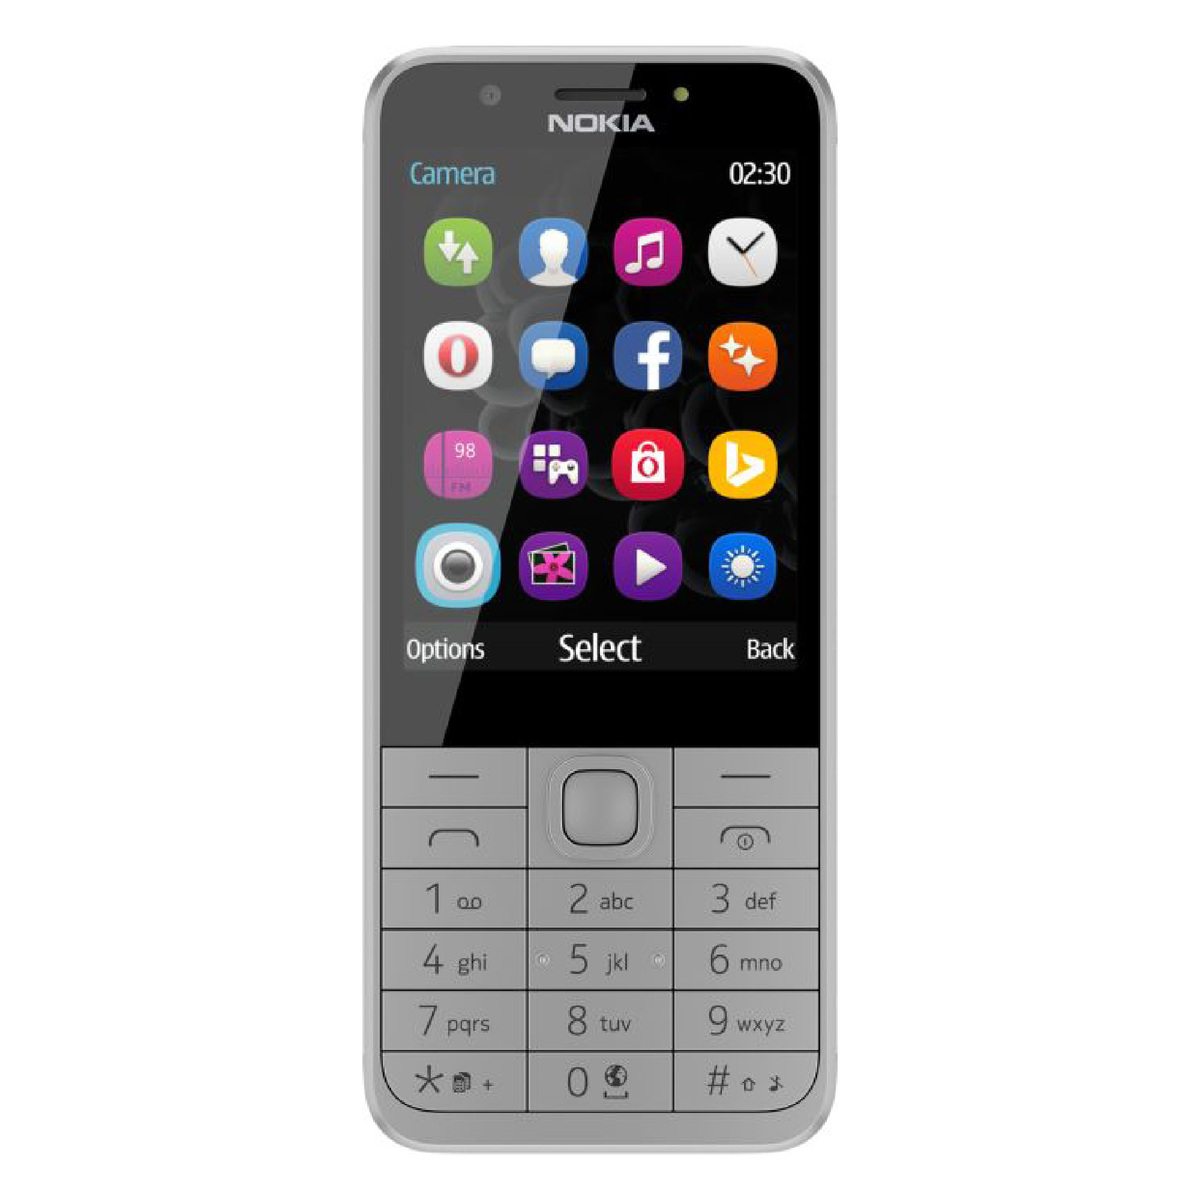 Nokia 230 Dual SIM 2G Feature Phone, 2.8 Inches Display, 16 MB RAM, Grey